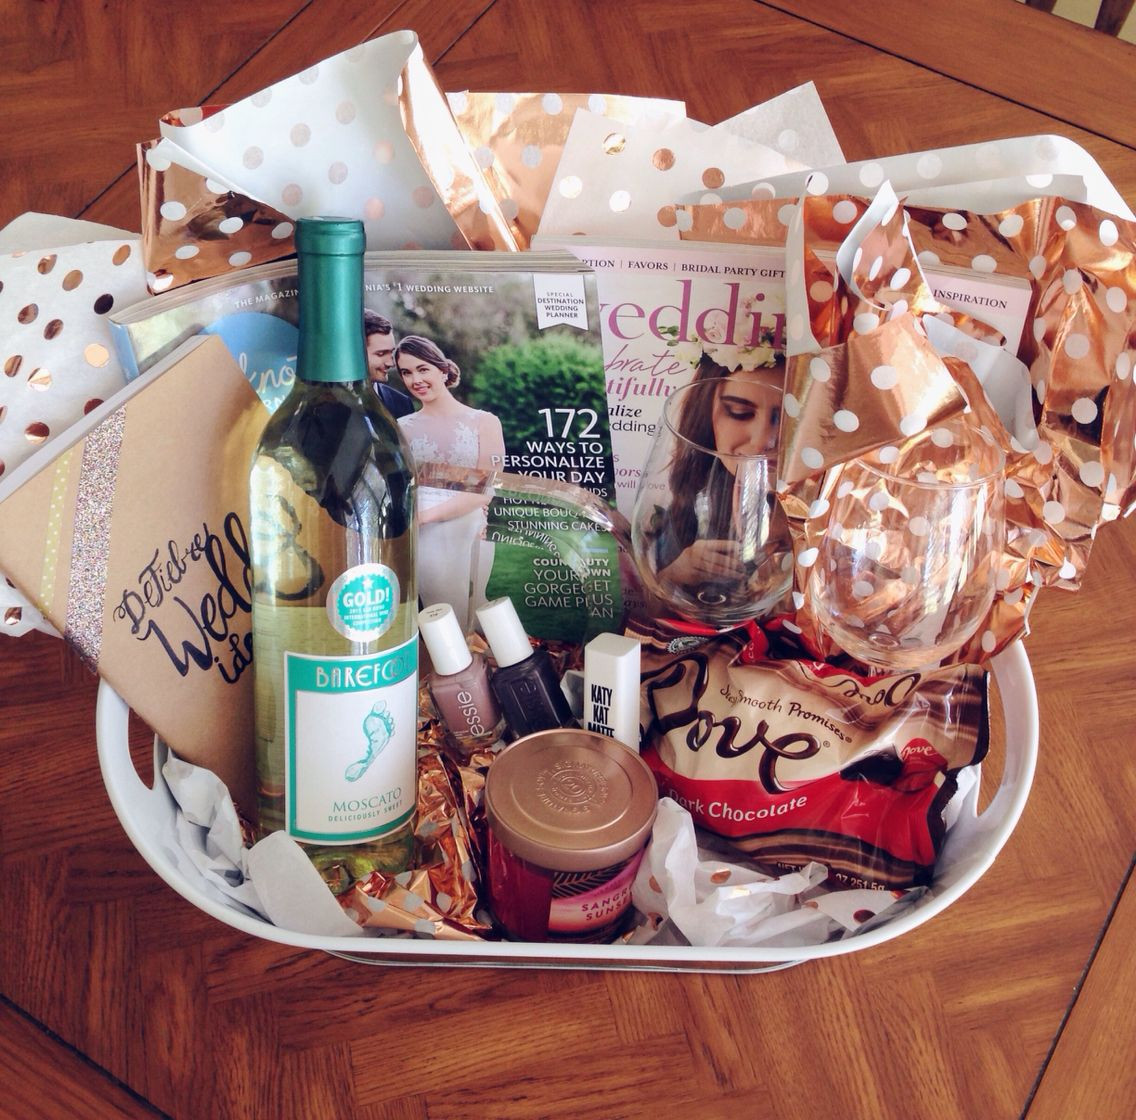 Engagement Party Ideas Gifts
 Engagement Gift Basket Survival Kit Everything your